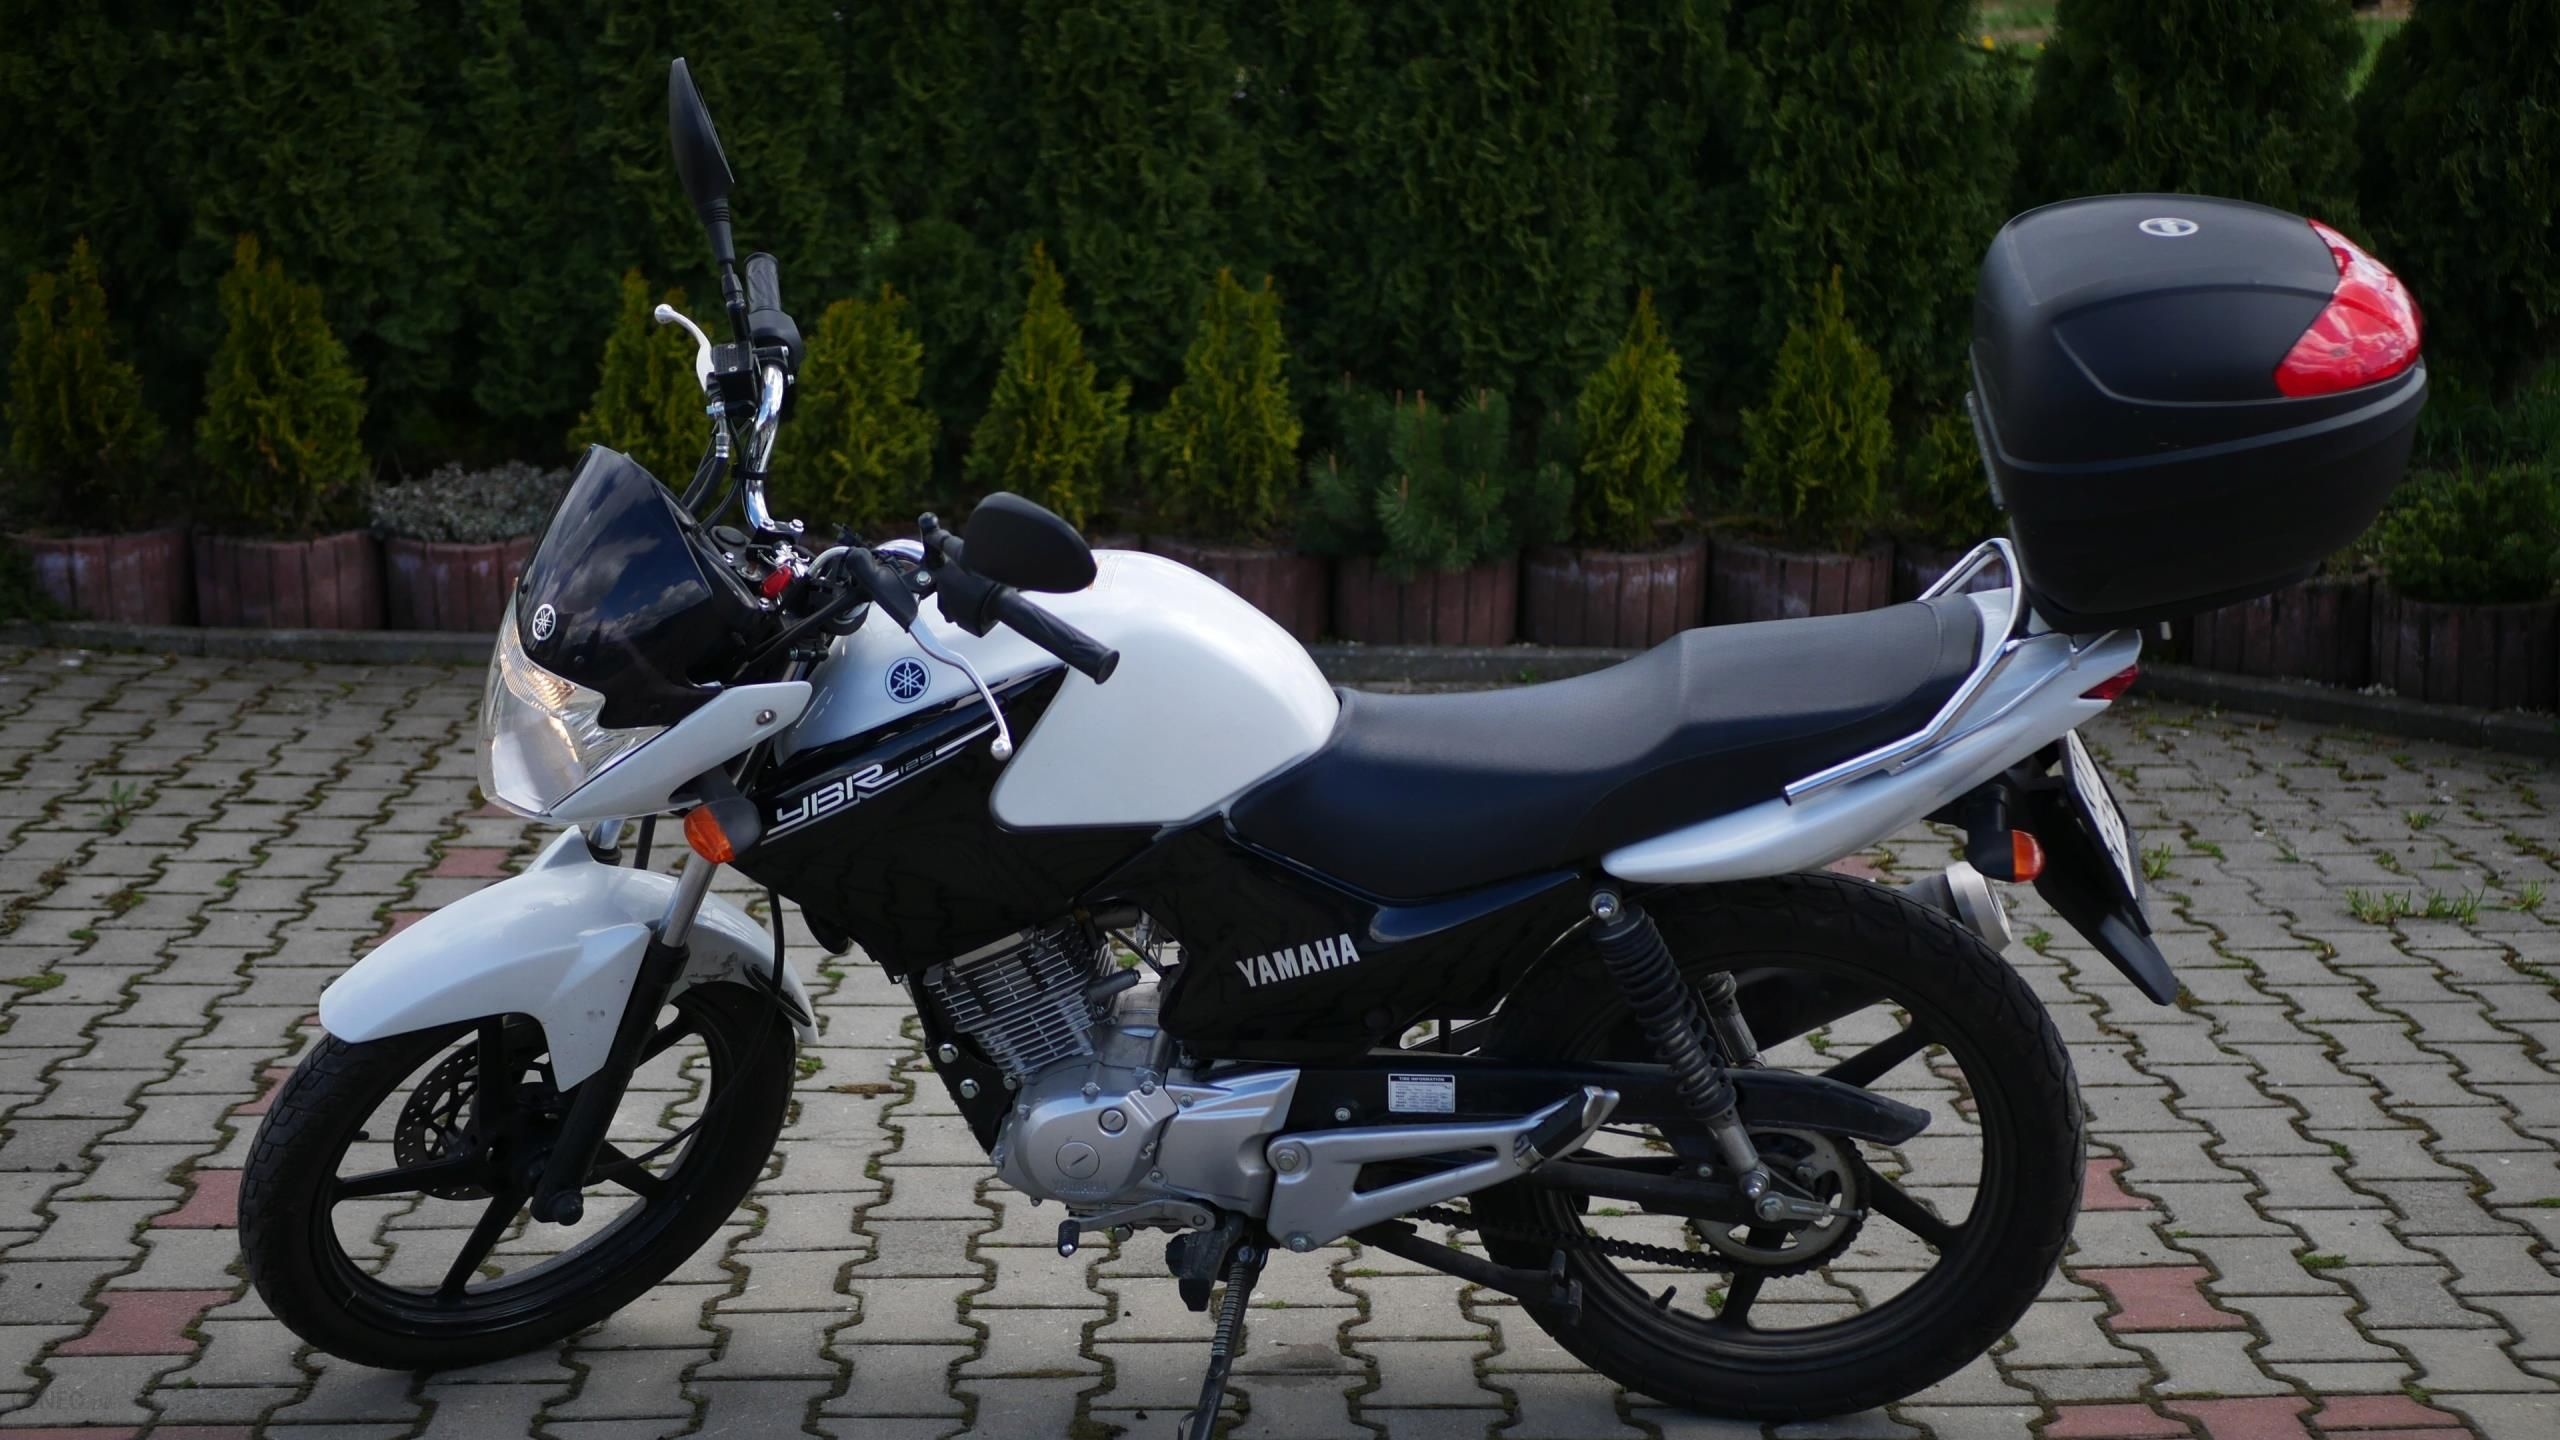 Yamaha YBR125, Trusted reviews, Affordable price, Reliable performance, 2560x1440 HD Desktop